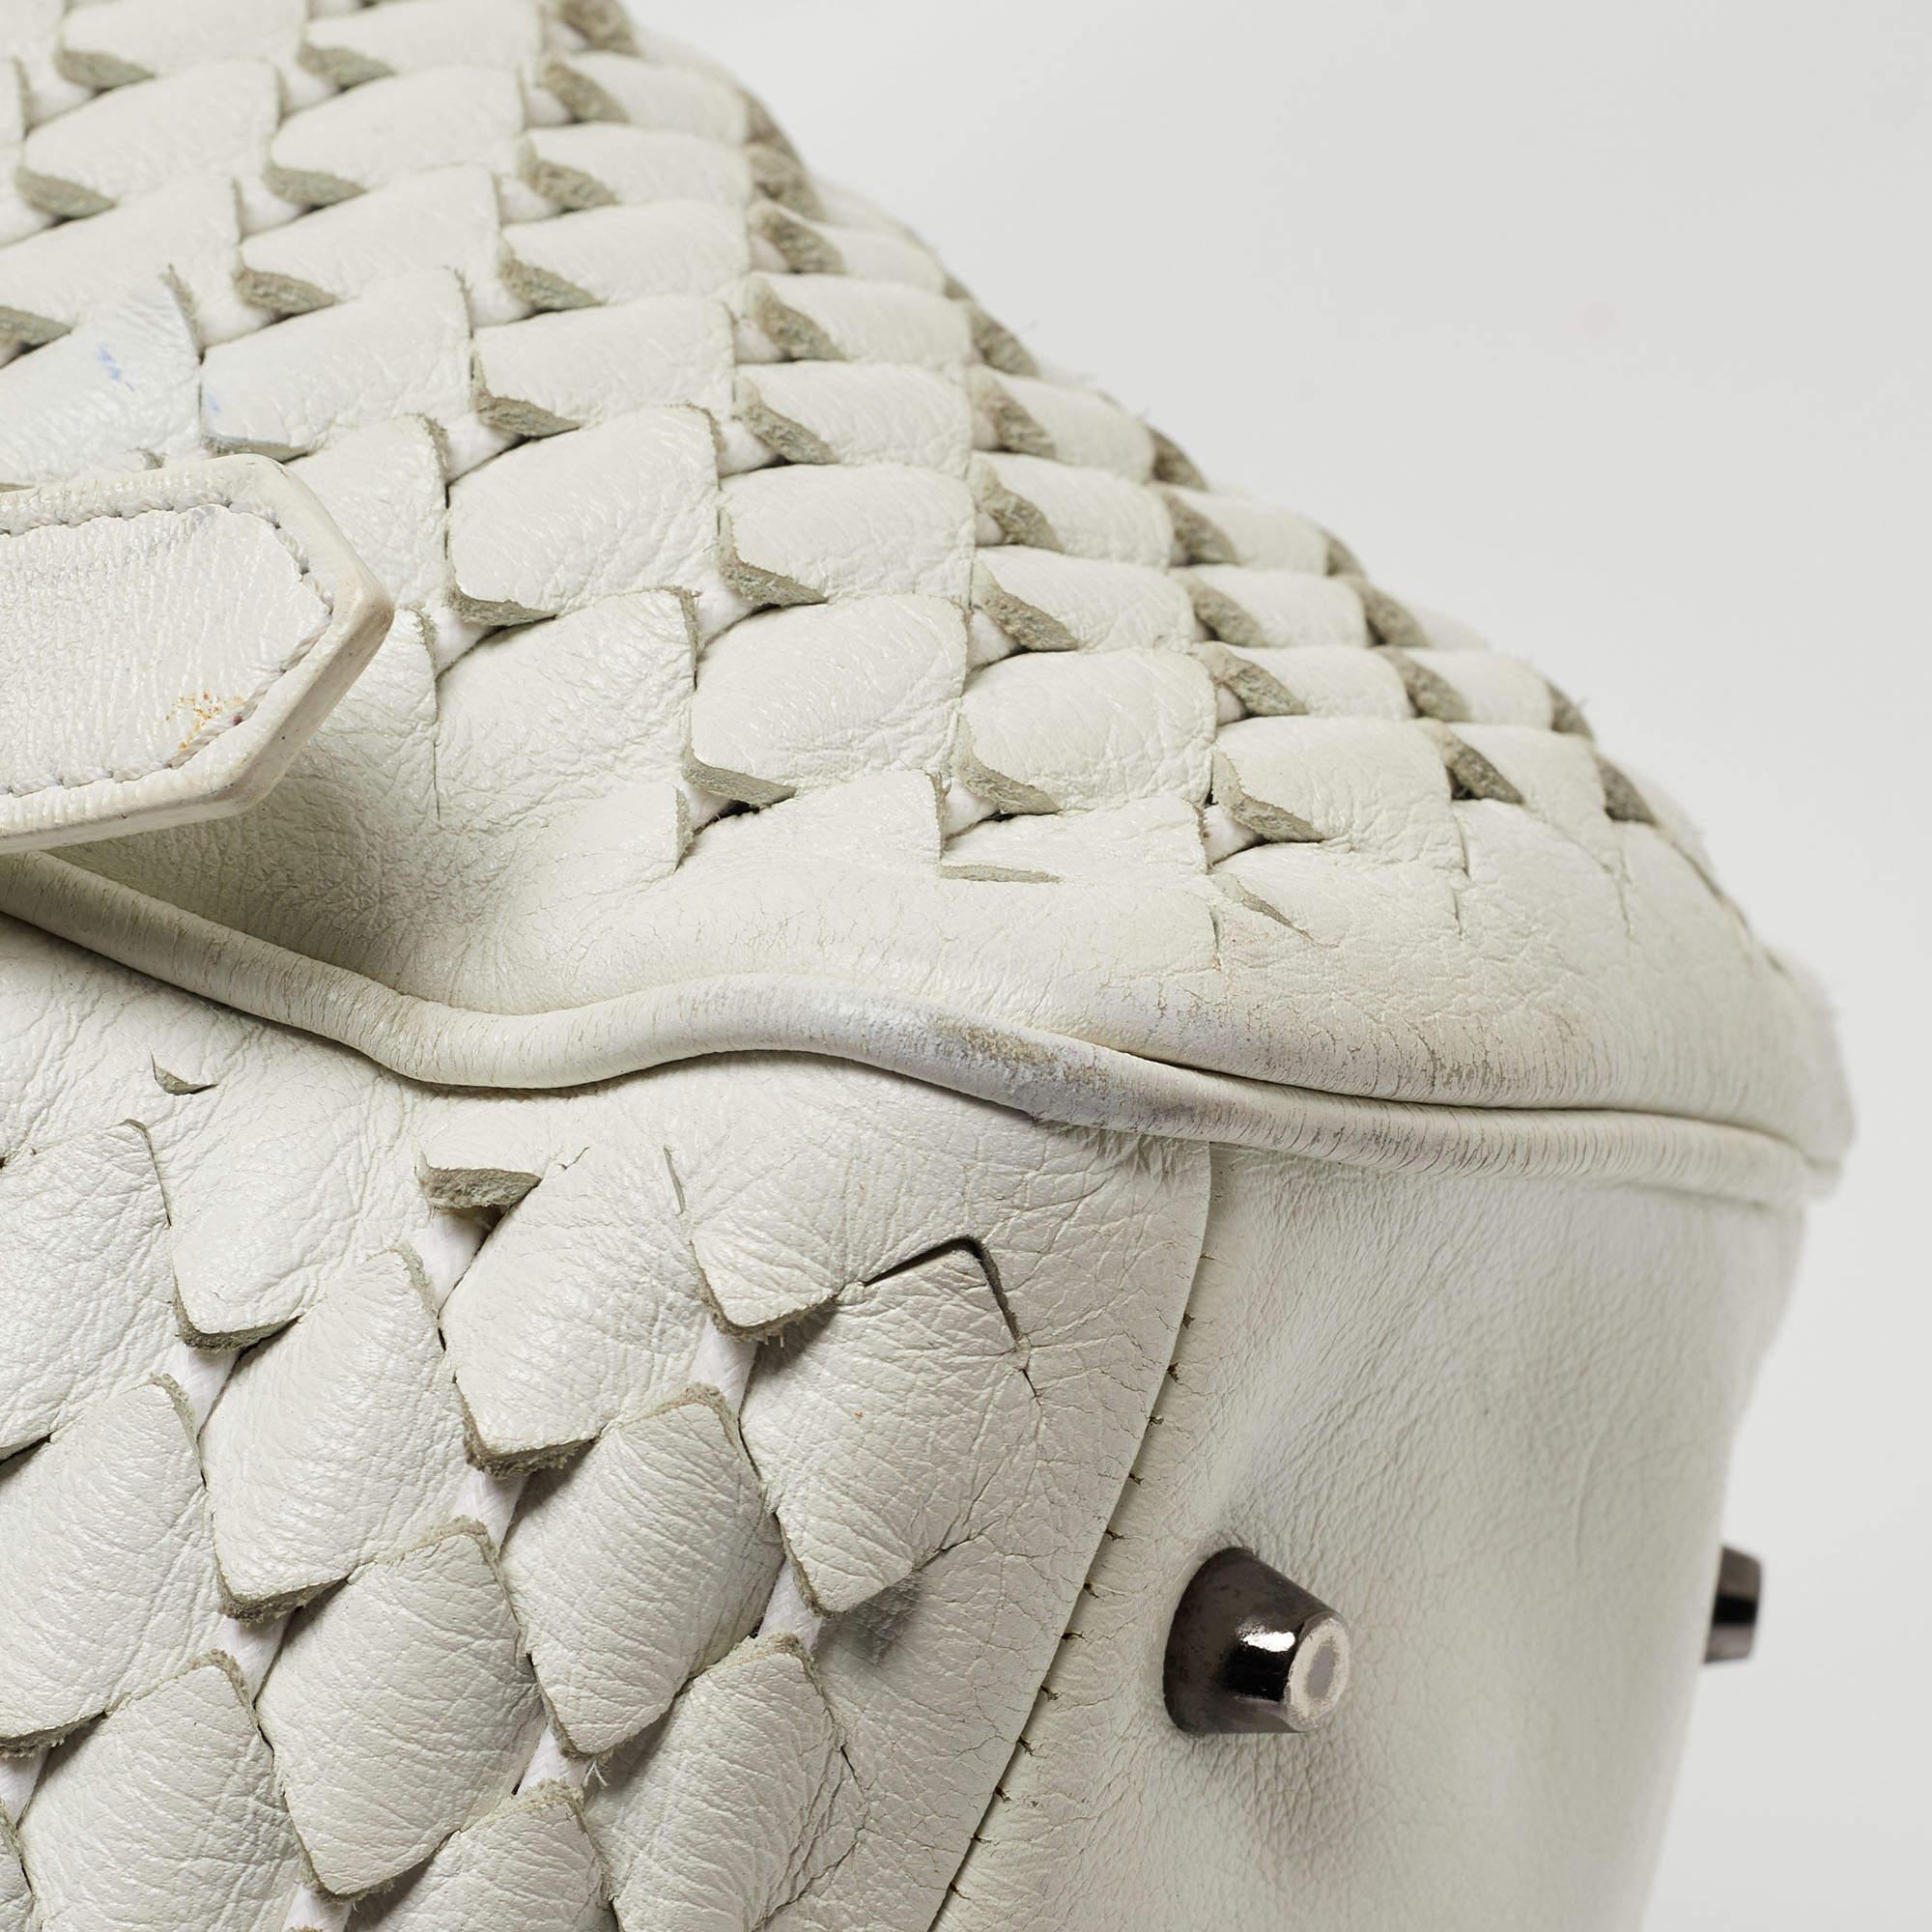 Burberry White Woven Leather Tote For Sale 6